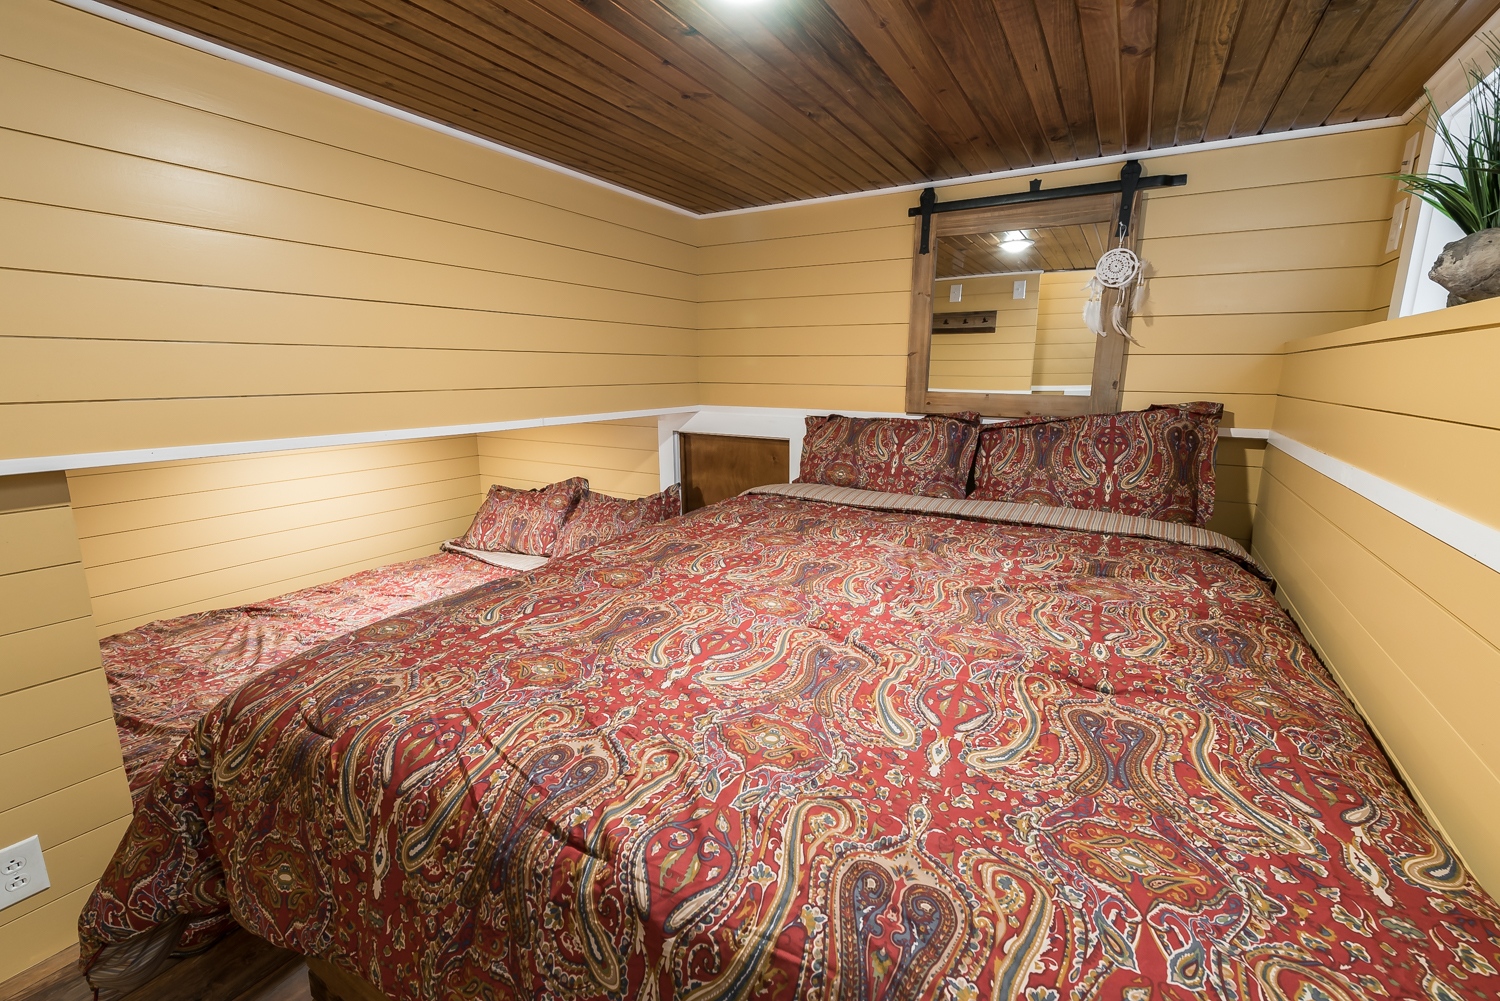 Tan-colored wall paneling in a bedroom with a large bed and a small side bed with matching red bedsheets